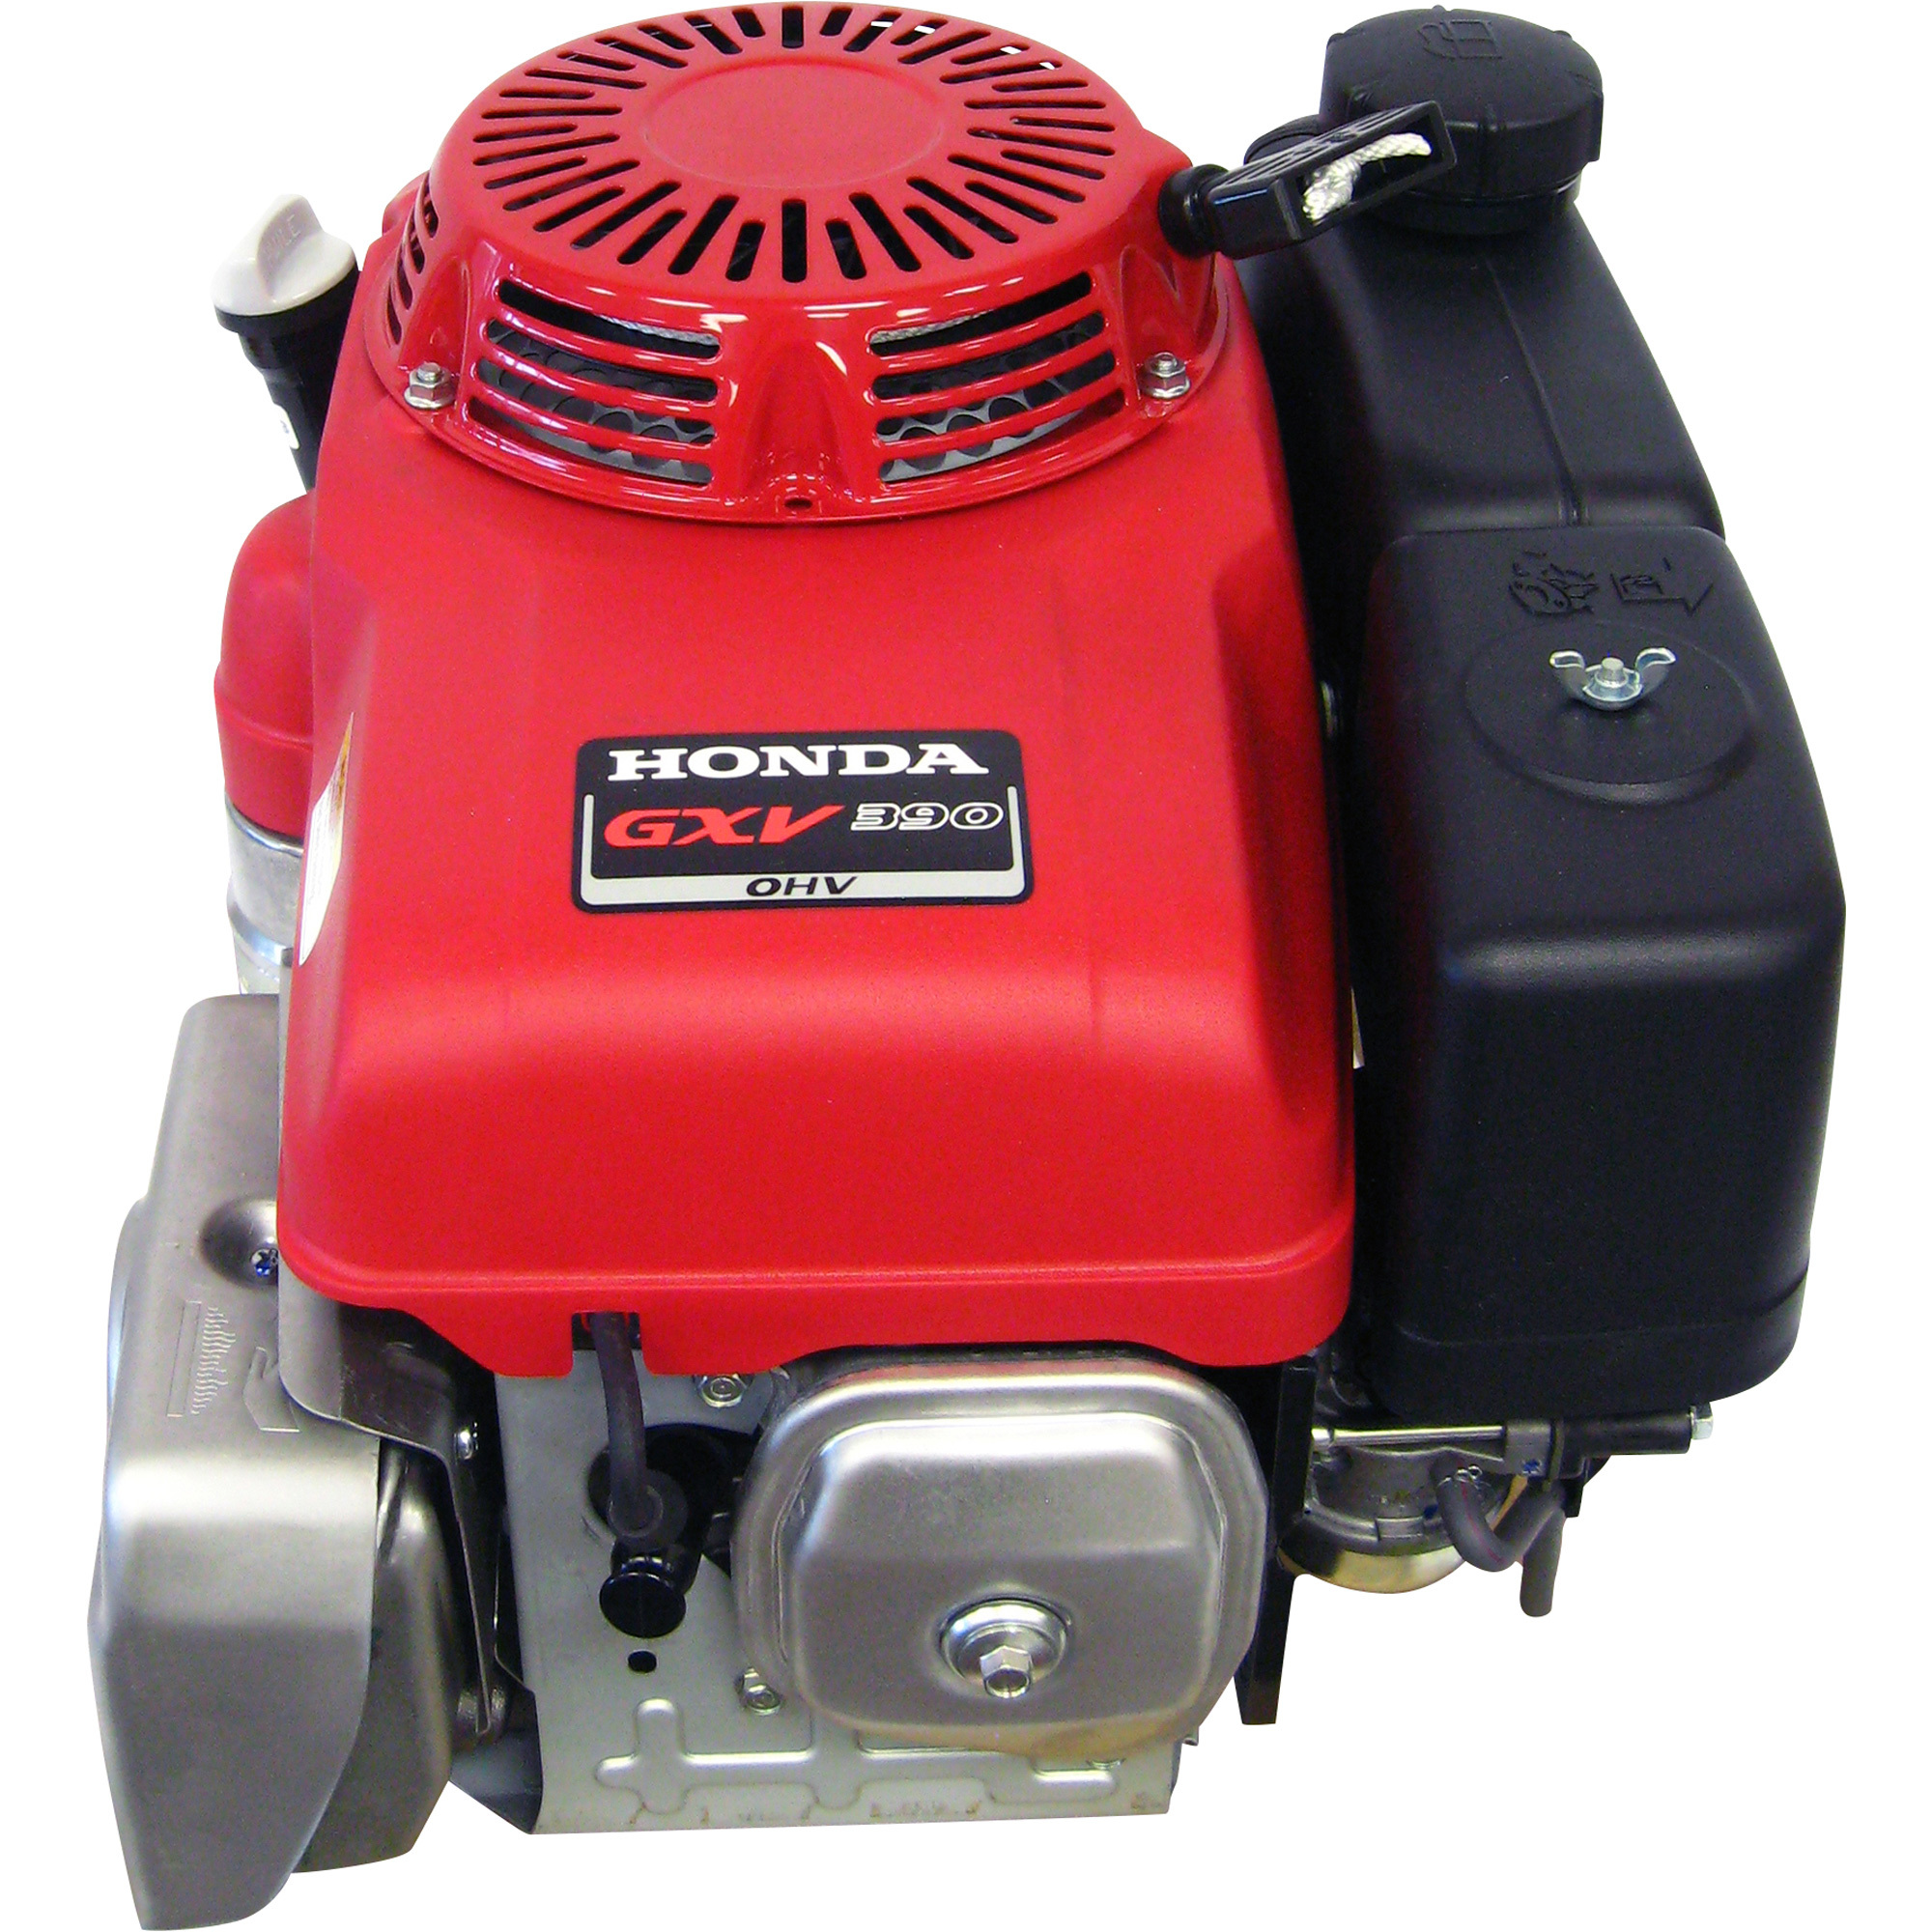 Honda Vertical OHV Engine with Electric Start â 389cc, GXV Series, 1Inch x 3.11Inch Shaft, Model GXV390UT1DEXT